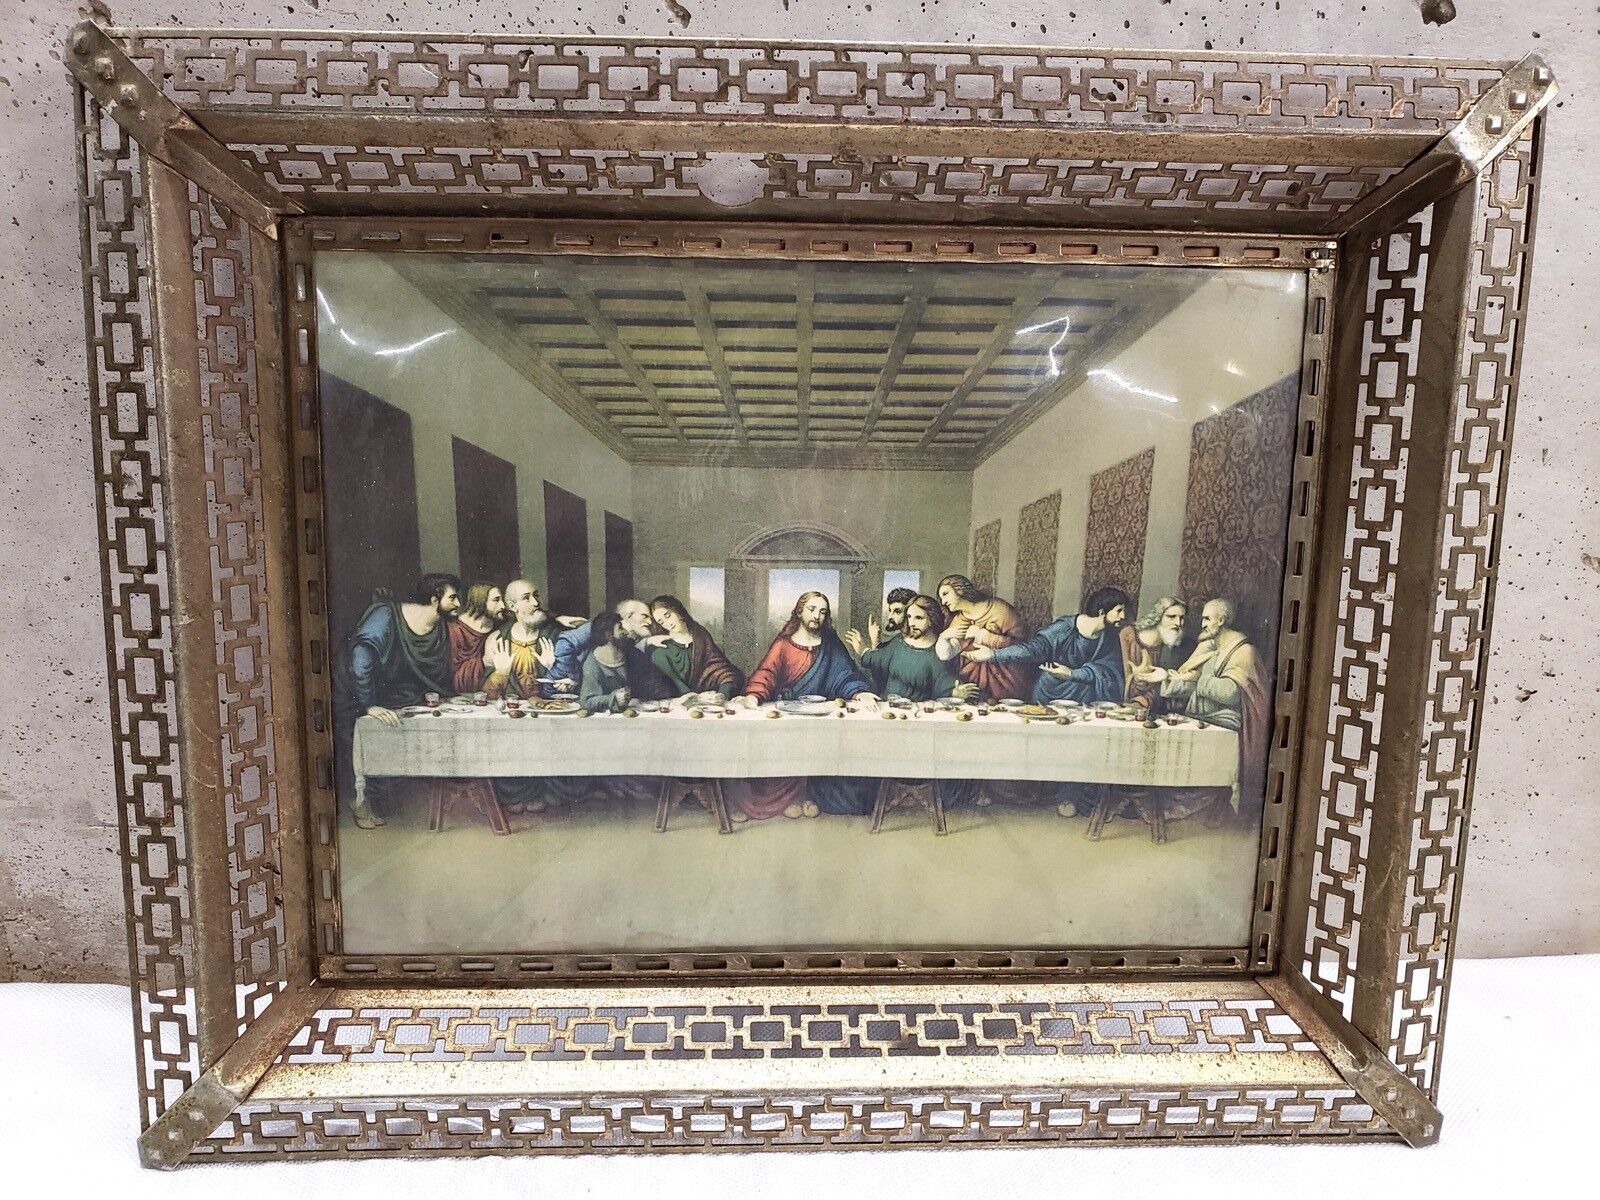 Framed Jesus Christ and the 12 Apolstles Last Supper Print 21” by 17” Frame